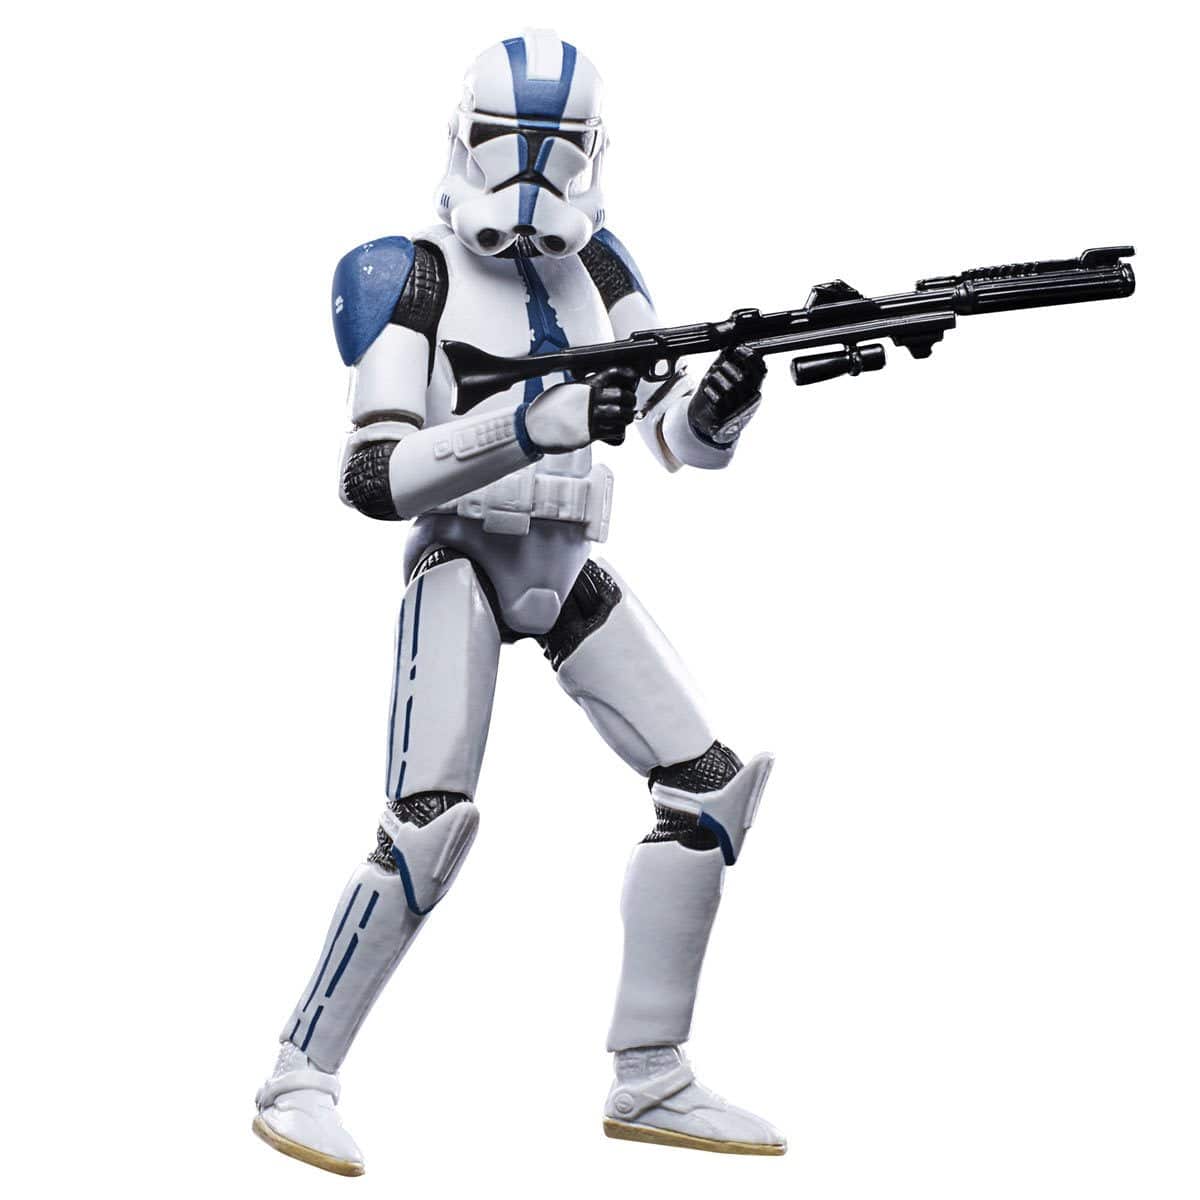 Star Wars The Vintage Collection Clone Trooper (501st Legion) 3 3/4-Inch Action Figure - Pop-O-Loco - Hasbro